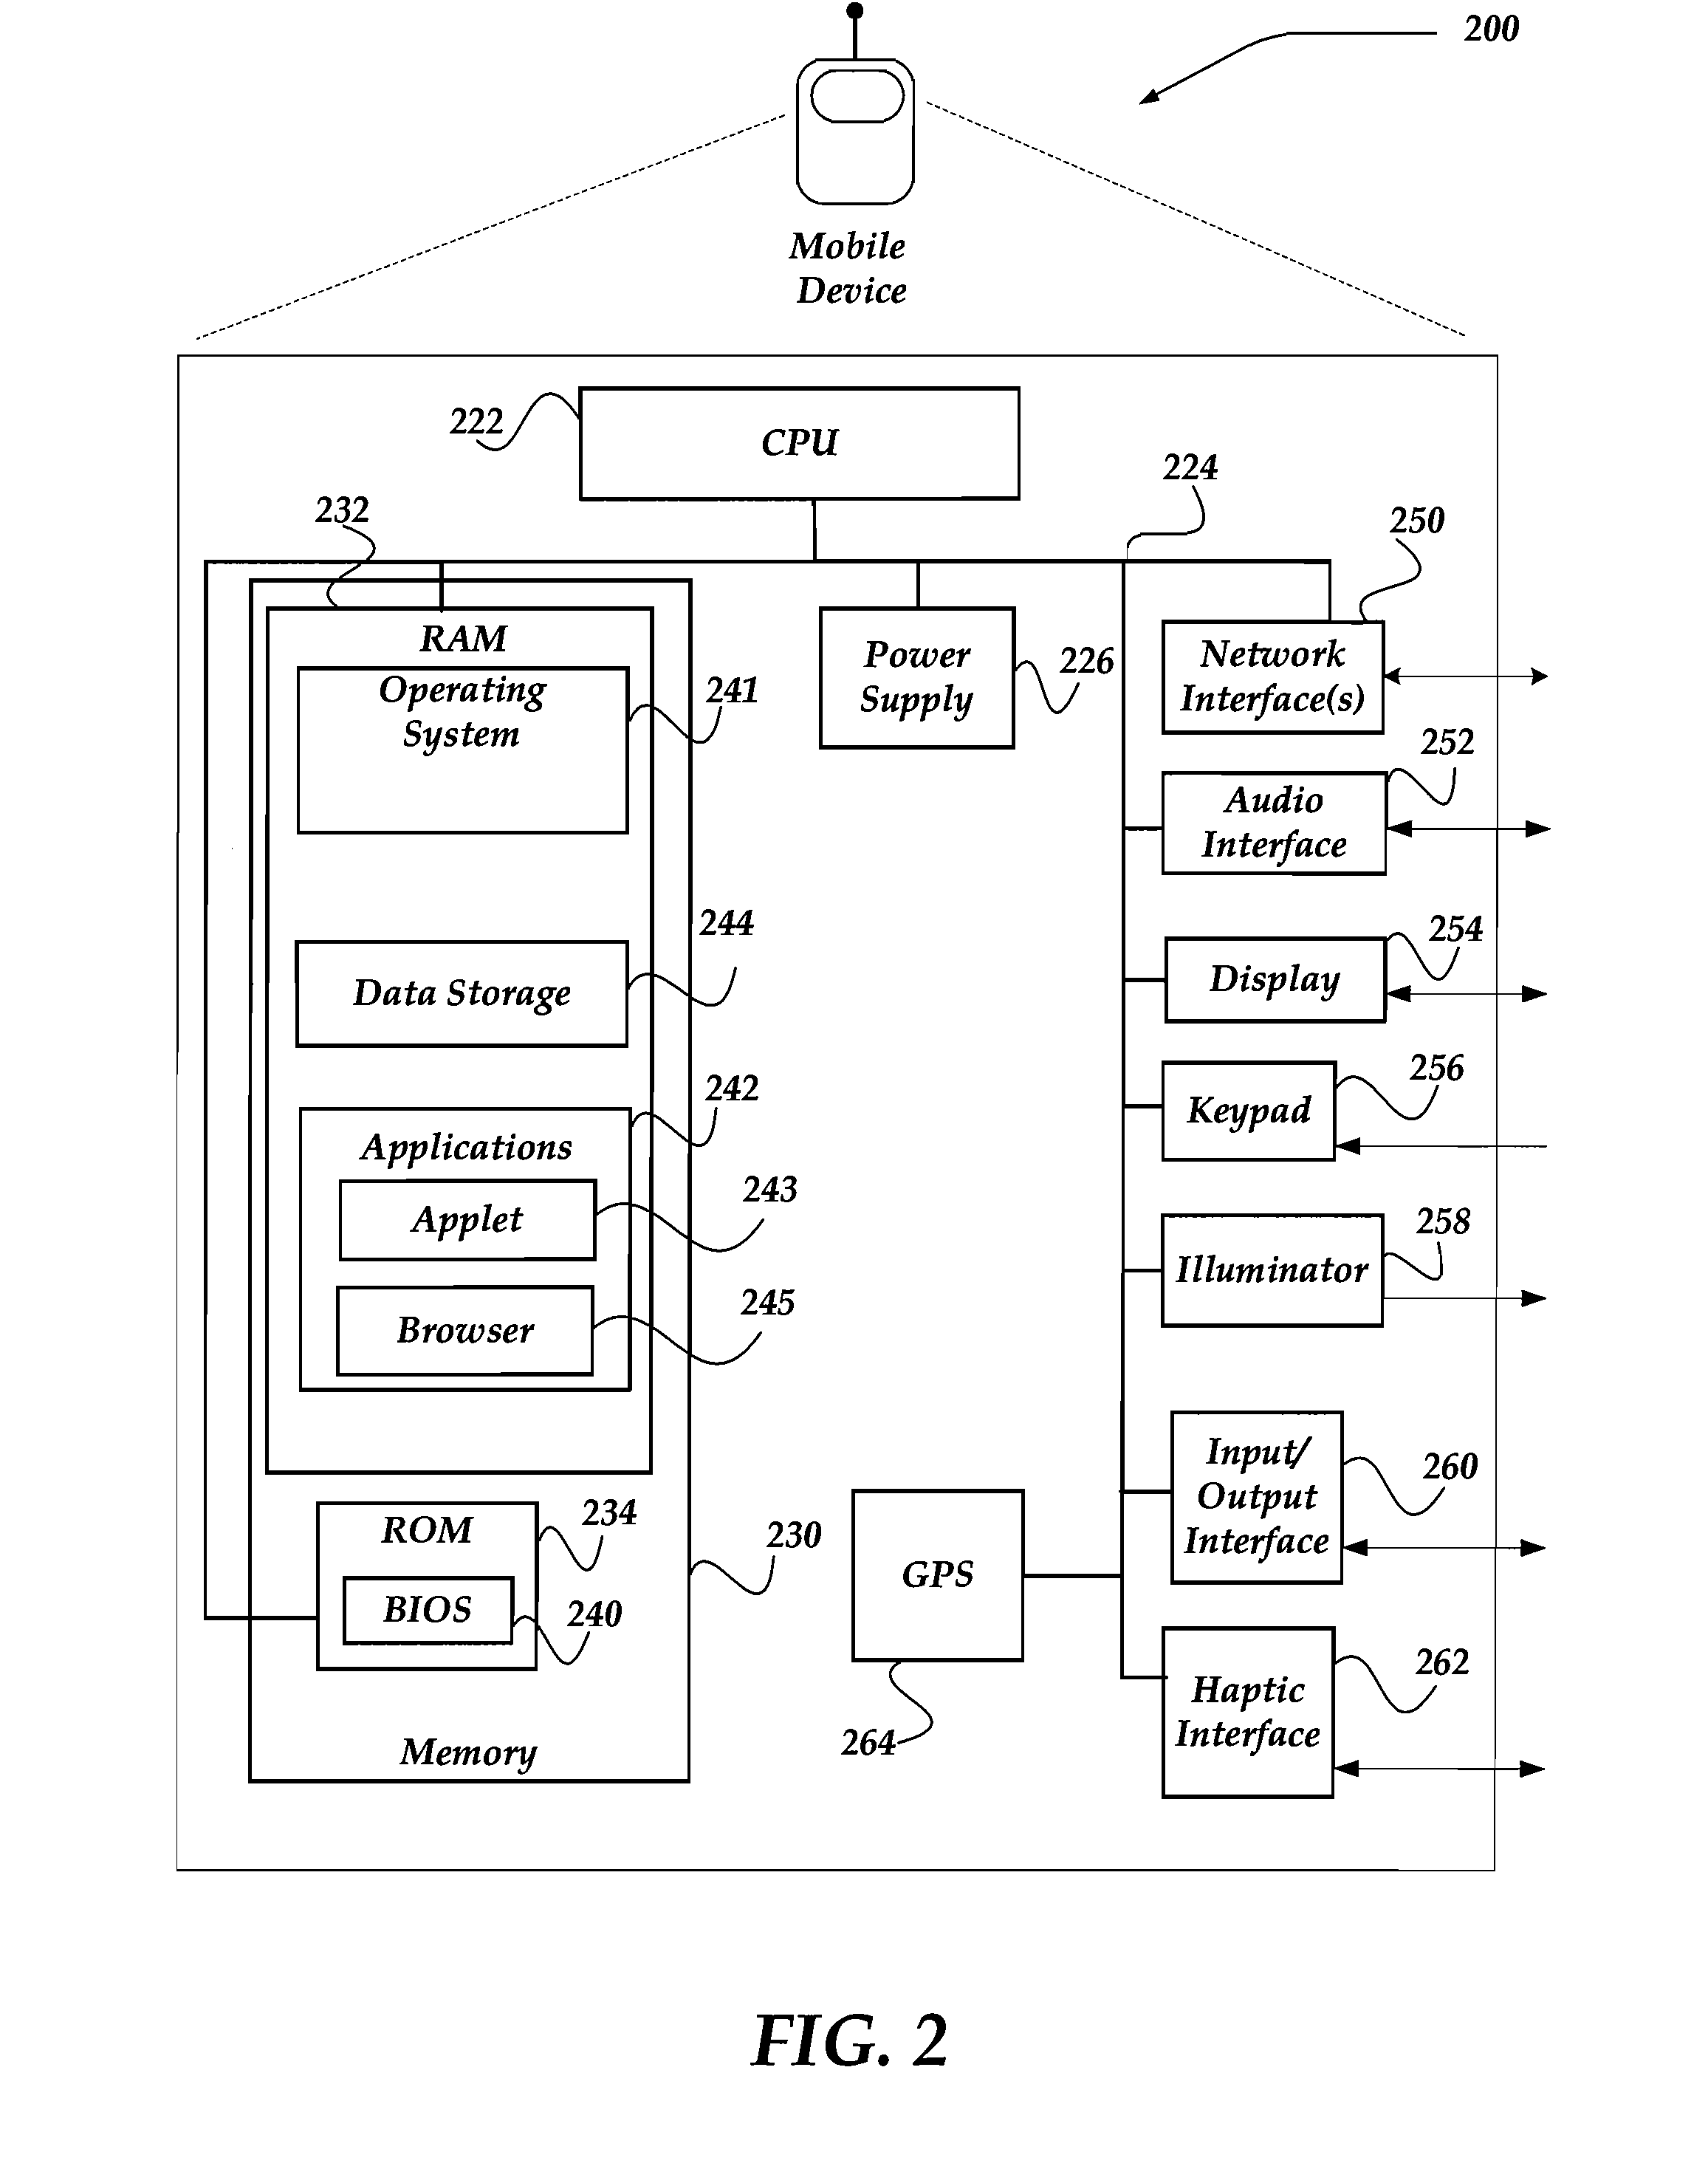 Platform for rendering content for a remote device